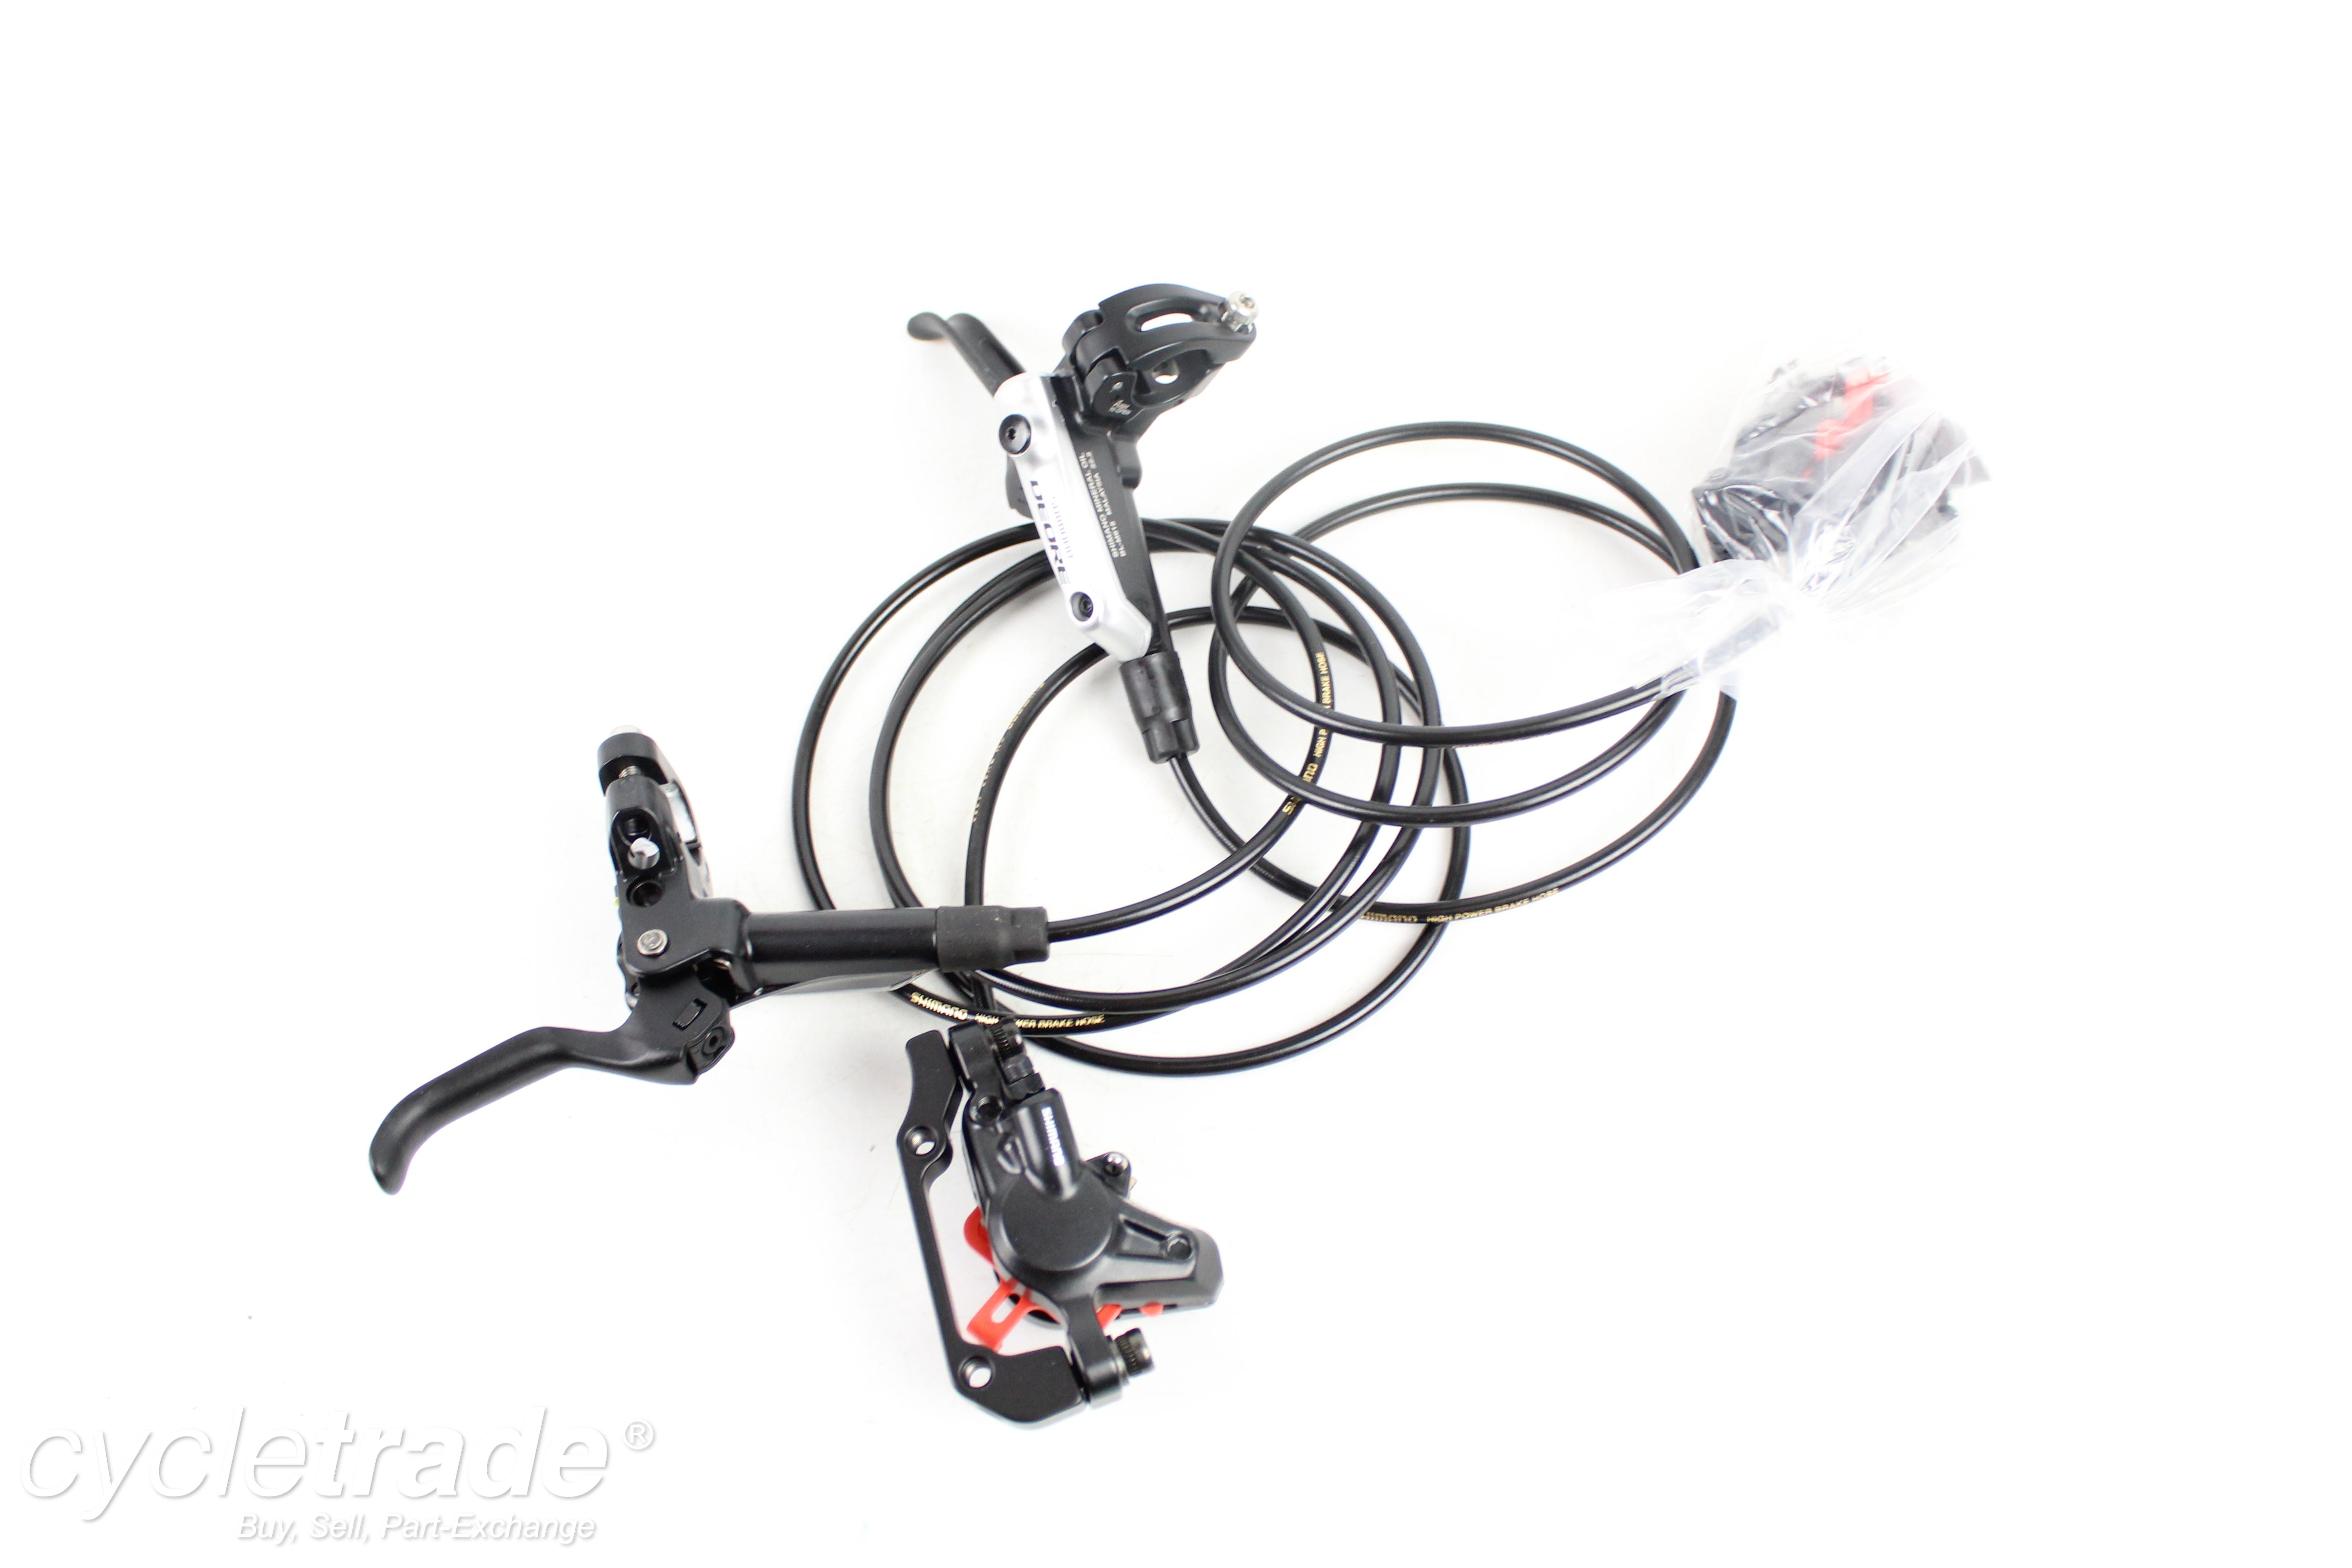 Hydraulic Disc Brakeset- Shimano Deore BR/BL-M615 - Grade A+ (New)